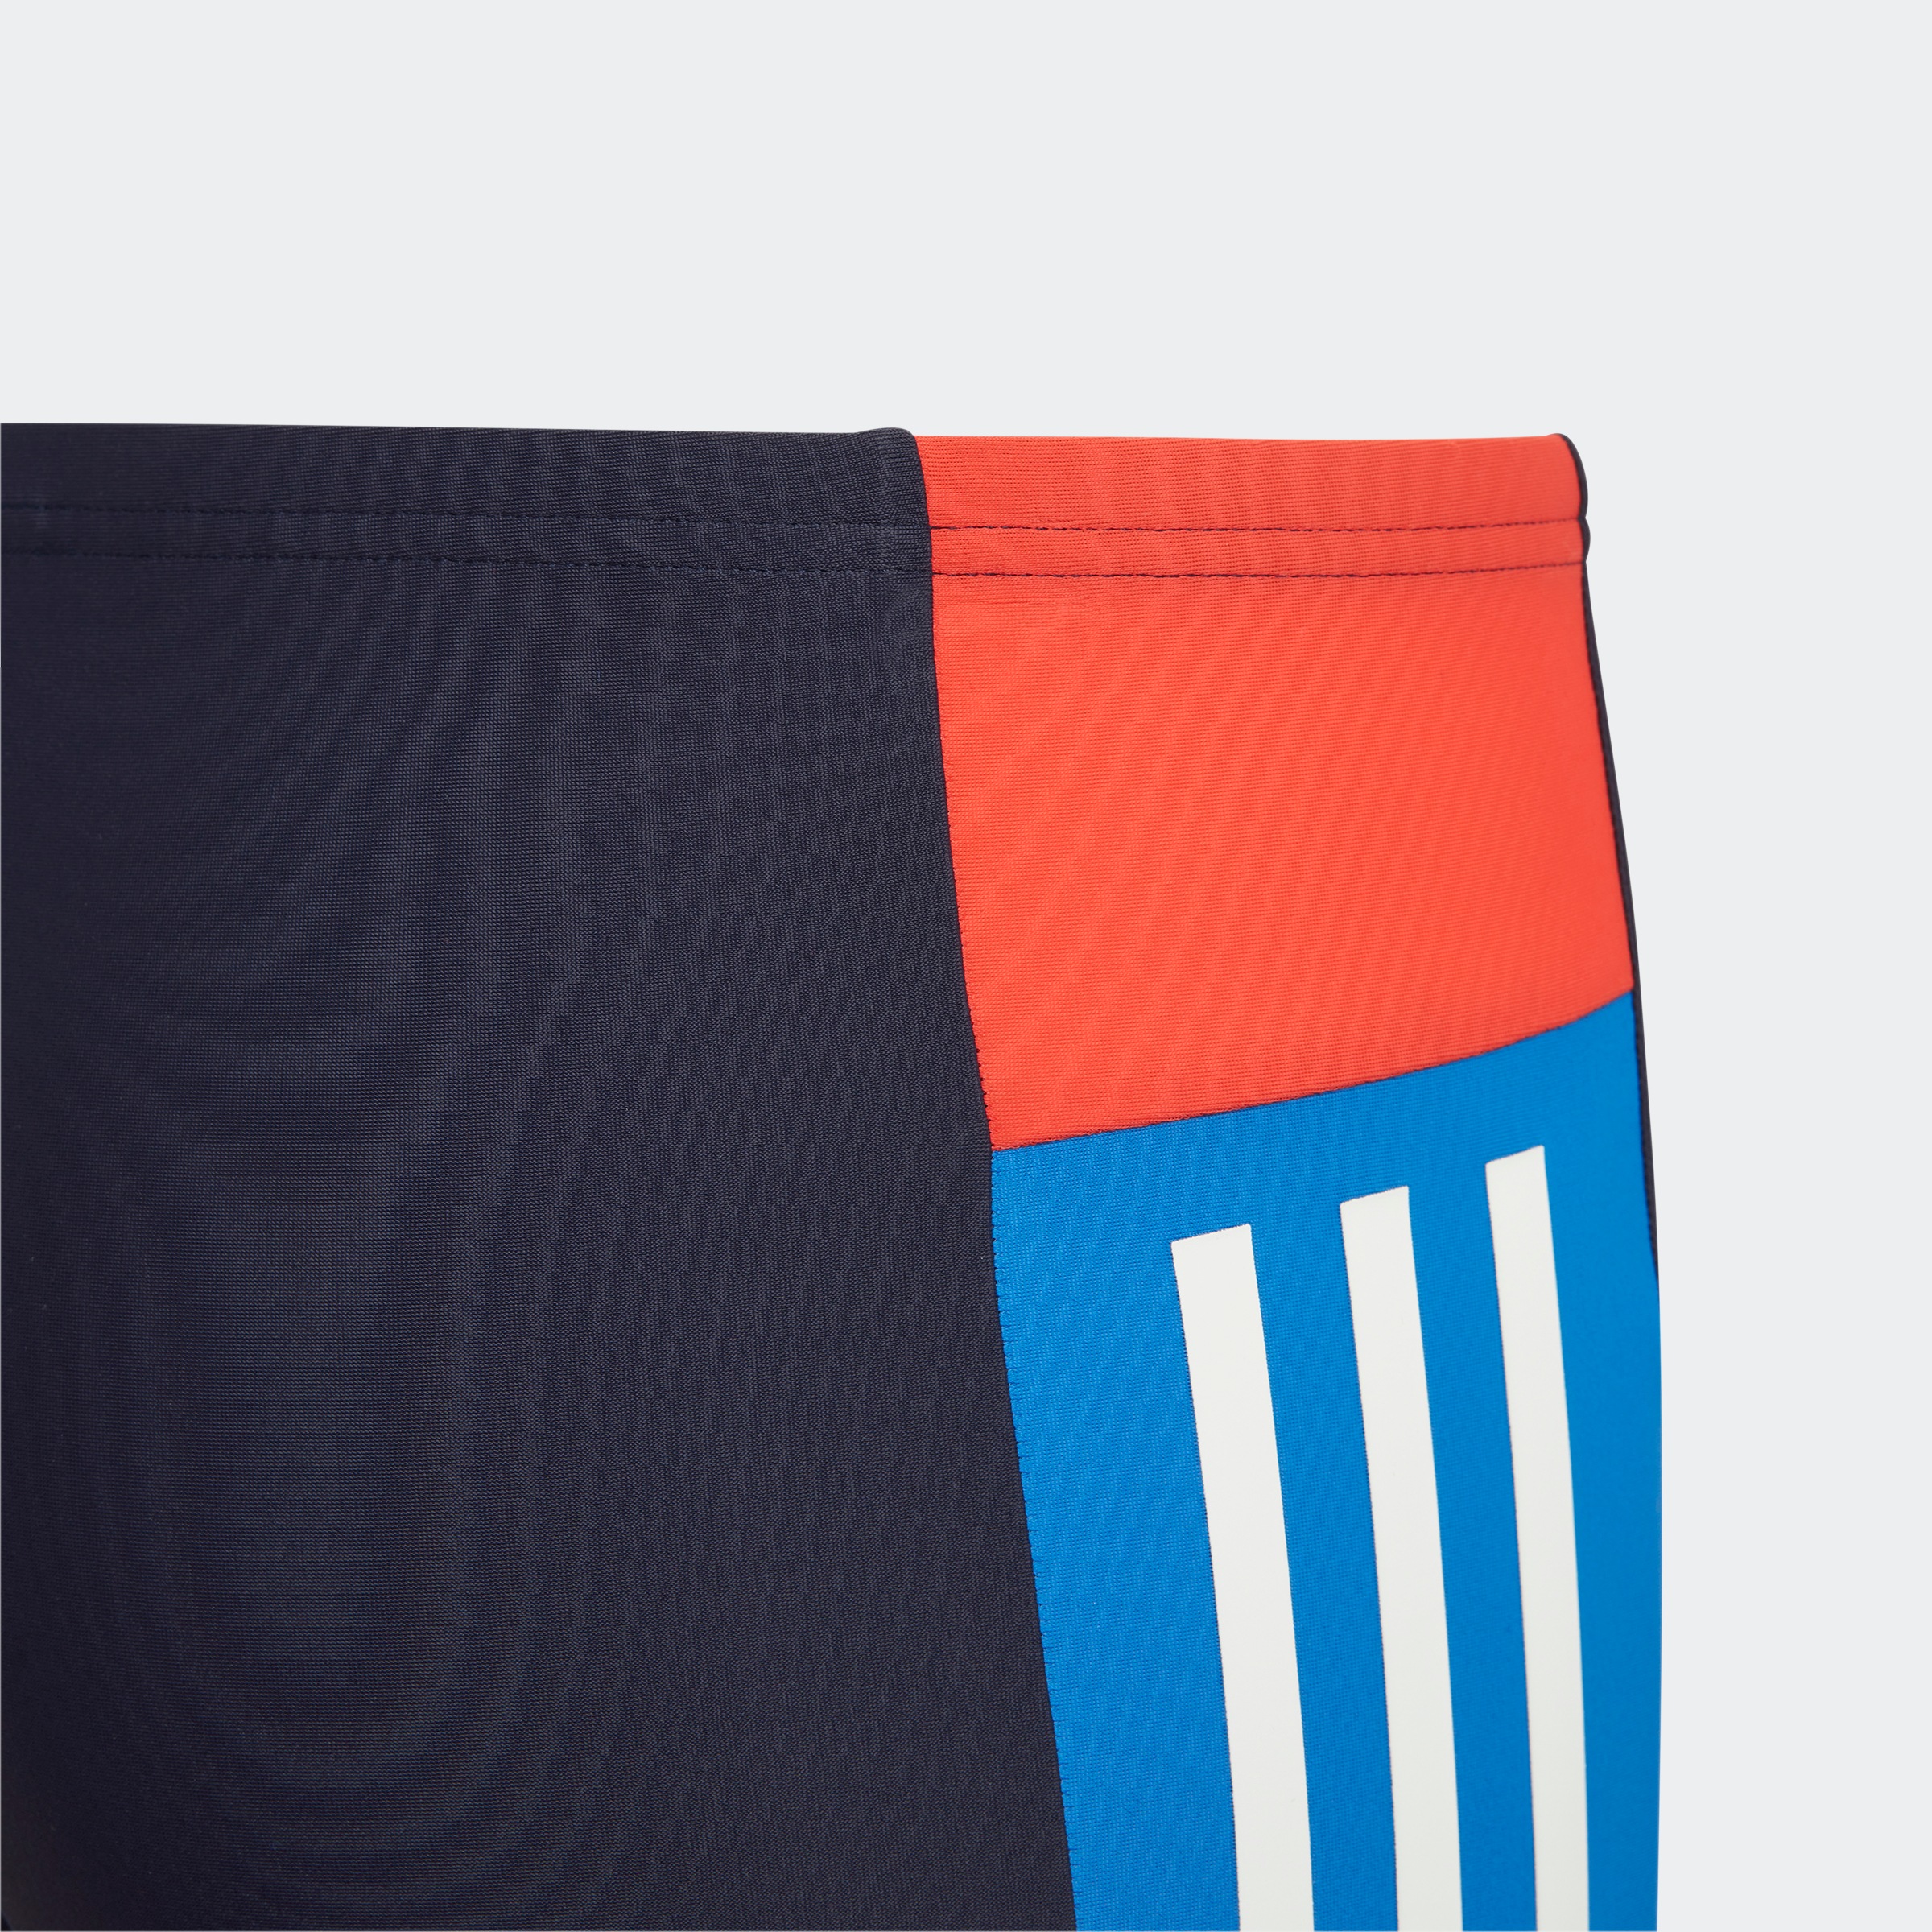 adidas Performance Badehose »CB 3S (1 BOXER«, bei St.)